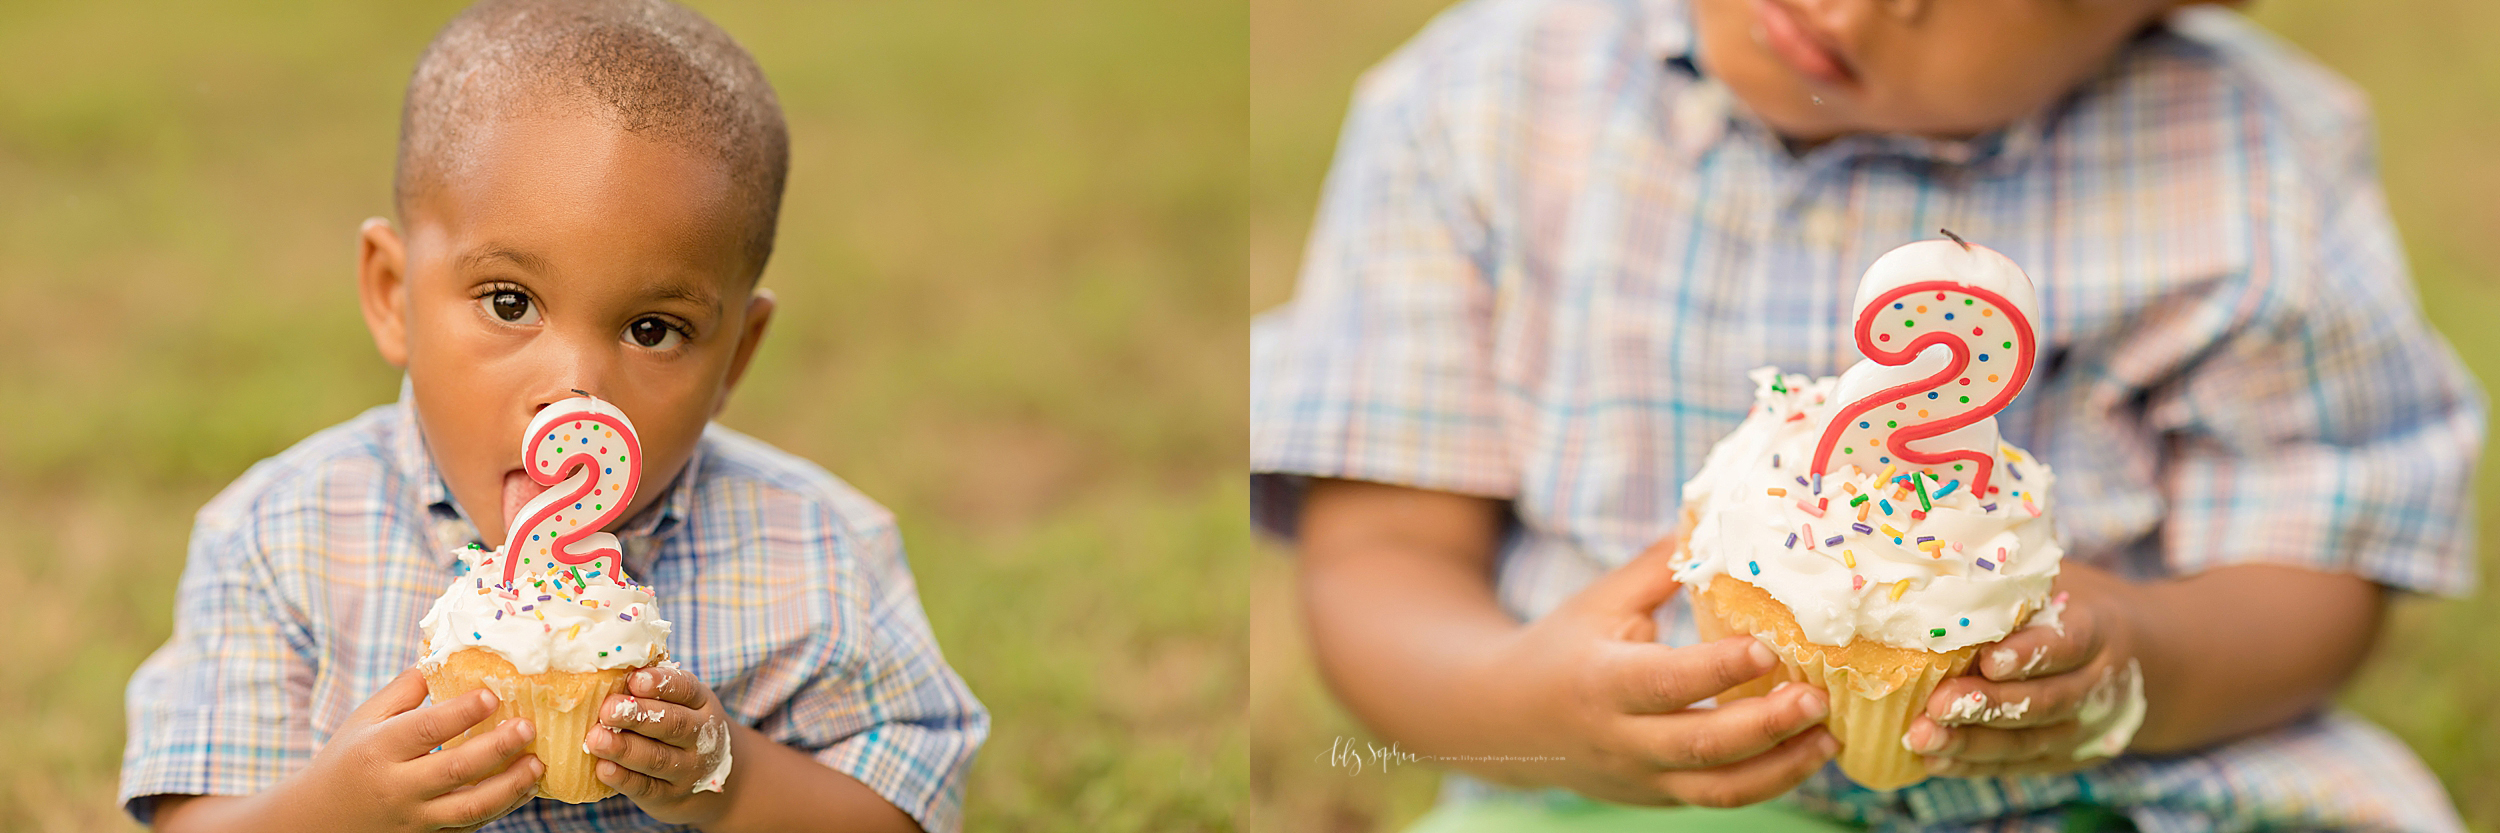  Cute African American two year old eating his birthday cupcake in the park.  He is holding the vanilla cupcake with white icing and a red outlined number two polka dotted candle on top in both his hands.  His tiny left hand has icing on it and he is